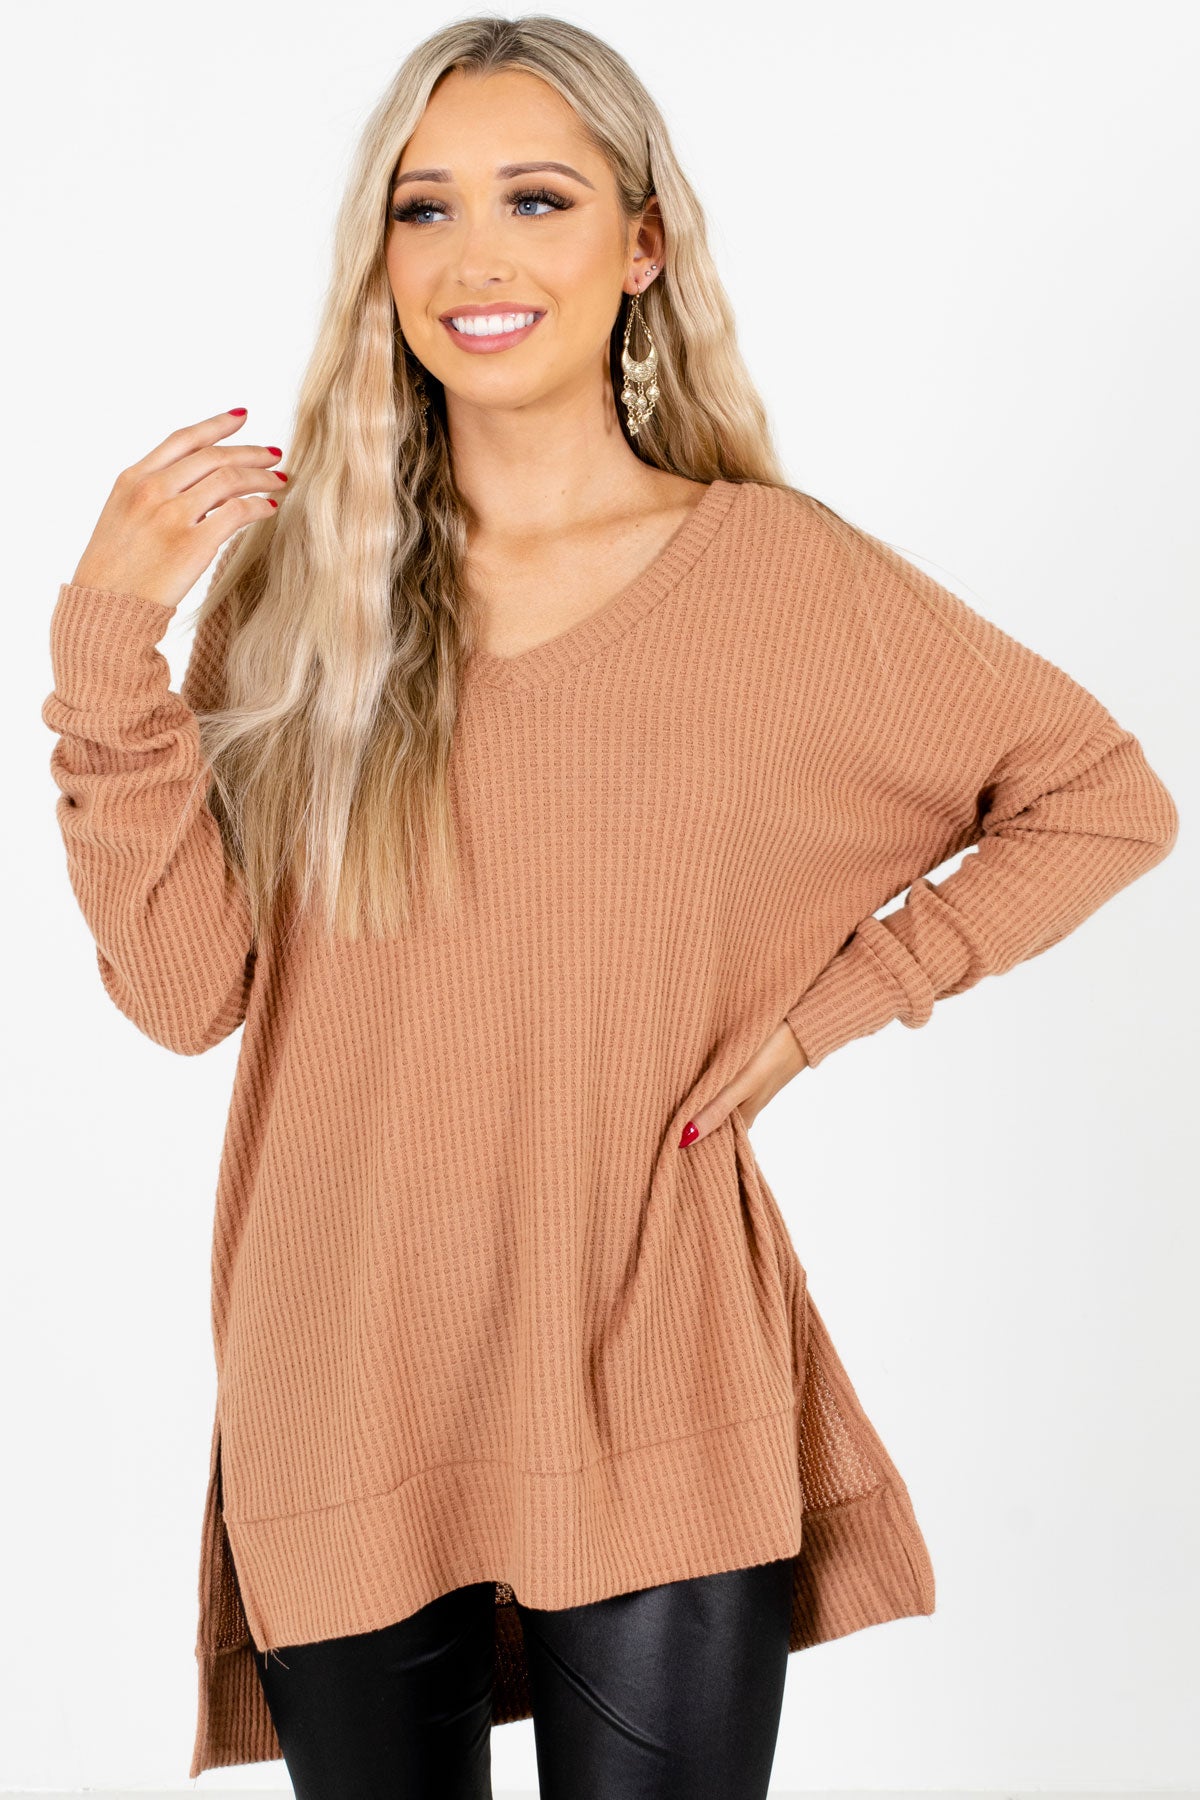 Tan Brown High-Quality Waffle Knit Material Boutique Tops for Women